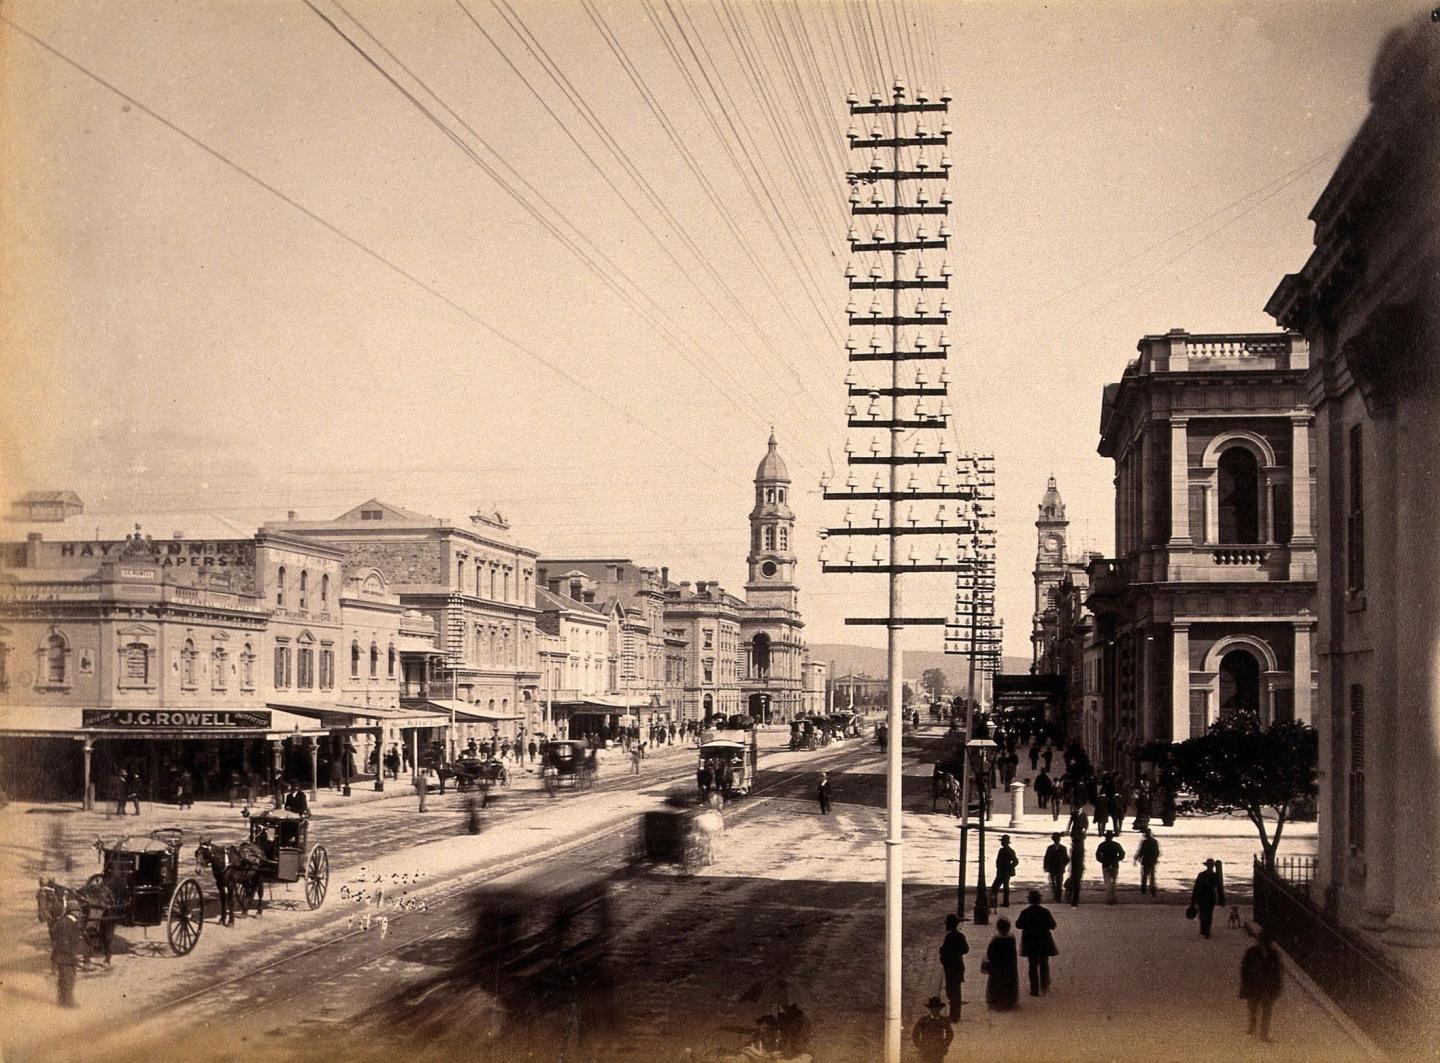 Adelaide, South Australia: King William Street. Albumen print by S.W. Sweet. Credit:  Wellcome Collection. 